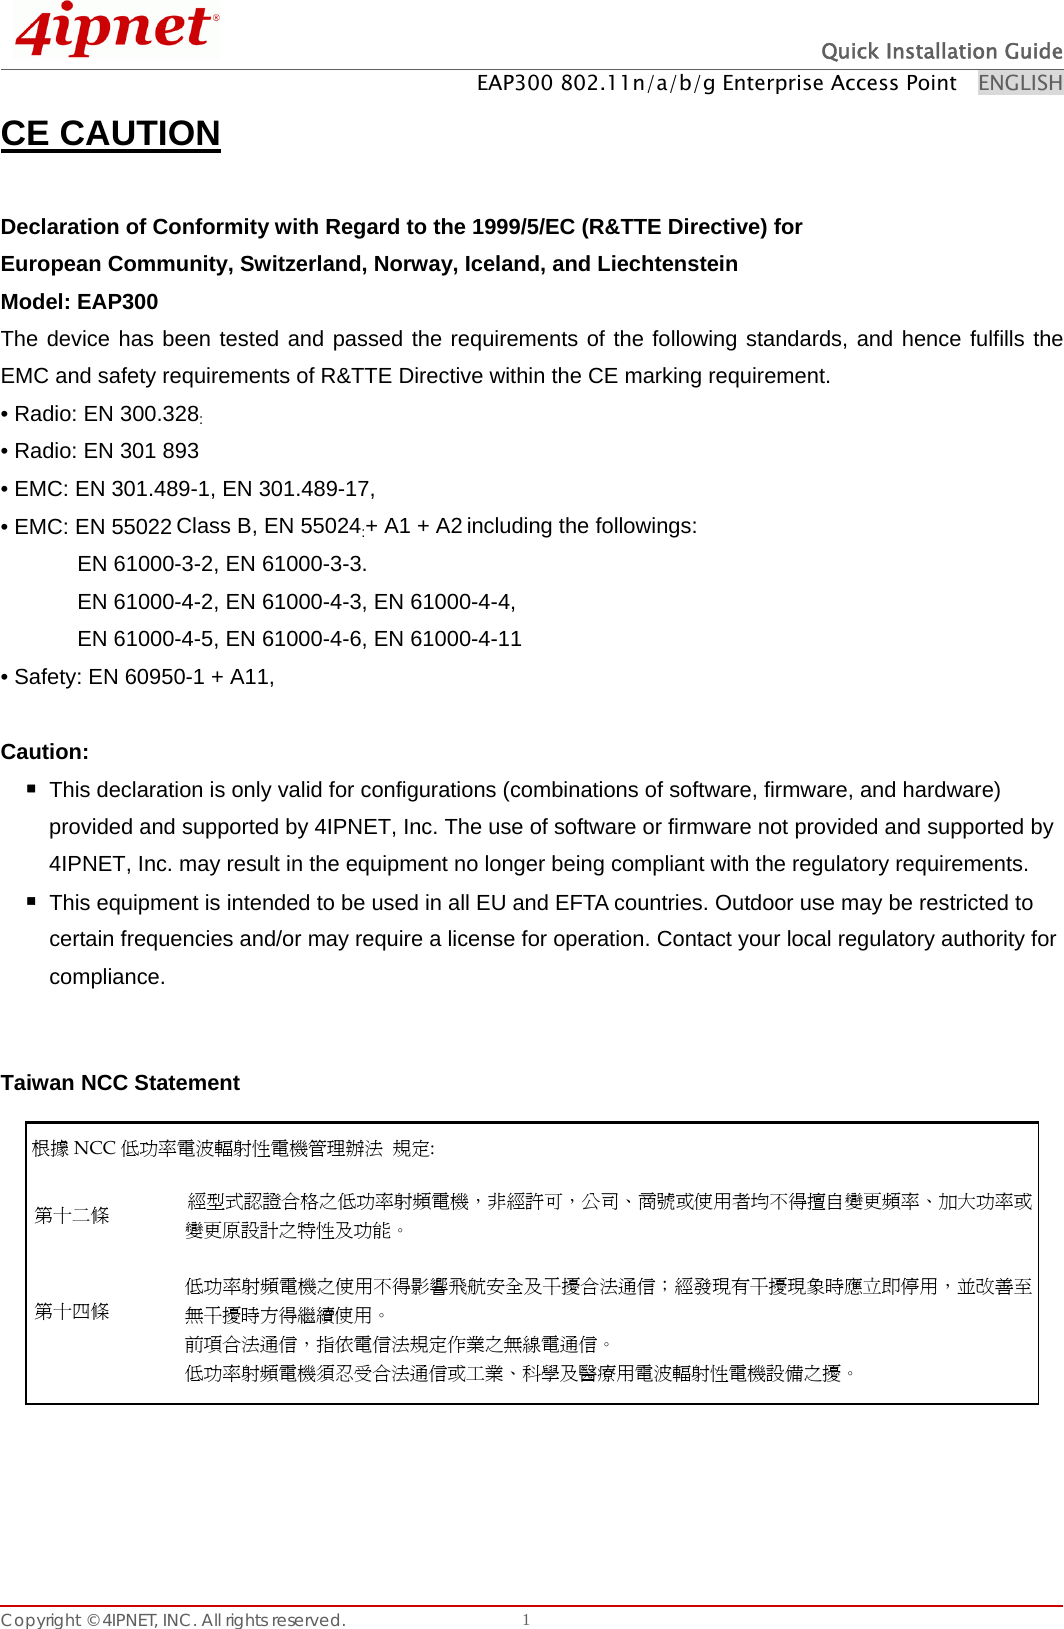  Quick Installation Guide EAP300 802.11n/a/b/g Enterprise Access Point    ENGLISH Copyright © 4IPNET, INC. All rights reserved.    1CE CAUTION  Declaration of Conformity with Regard to the 1999/5/EC (R&amp;TTE Directive) for   European Community, Switzerland, Norway, Iceland, and Liechtenstein   Model: EAP300   The device has been tested and passed the requirements of the following standards, and hence fulfills the EMC and safety requirements of R&amp;TTE Directive within the CE marking requirement. • Radio: EN 300.328: • Radio: EN 301 893 • EMC: EN 301.489-1, EN 301.489-17,   • EMC: EN 55022 Class B, EN 55024:+ A1 + A2 including the followings:       EN 61000-3-2, EN 61000-3-3.       EN 61000-4-2, EN 61000-4-3, EN 61000-4-4,         EN 61000-4-5, EN 61000-4-6, EN 61000-4-11 • Safety: EN 60950-1 + A11,  Caution:   This declaration is only valid for configurations (combinations of software, firmware, and hardware) provided and supported by 4IPNET, Inc. The use of software or firmware not provided and supported by 4IPNET, Inc. may result in the equipment no longer being compliant with the regulatory requirements.    This equipment is intended to be used in all EU and EFTA countries. Outdoor use may be restricted to certain frequencies and/or may require a license for operation. Contact your local regulatory authority for compliance.   Taiwan NCC Statement   根據 NCC 低功率電波輻射性電機管理辦法 規定: 第十二條 經型式認證合格之低功率射頻電機，非經許可，公司、商號或使用者均不得擅自變更頻率、加大功率或變更原設計之特性及功能。 第十四條   低功率射頻電機之使用不得影響飛航安全及干擾合法通信；經發現有干擾現象時應立即停用，並改善至無干擾時方得繼續使用。 前項合法通信，指依電信法規定作業之無線電通信。 低功率射頻電機須忍受合法通信或工業、科學及醫療用電波輻射性電機設備之擾。  